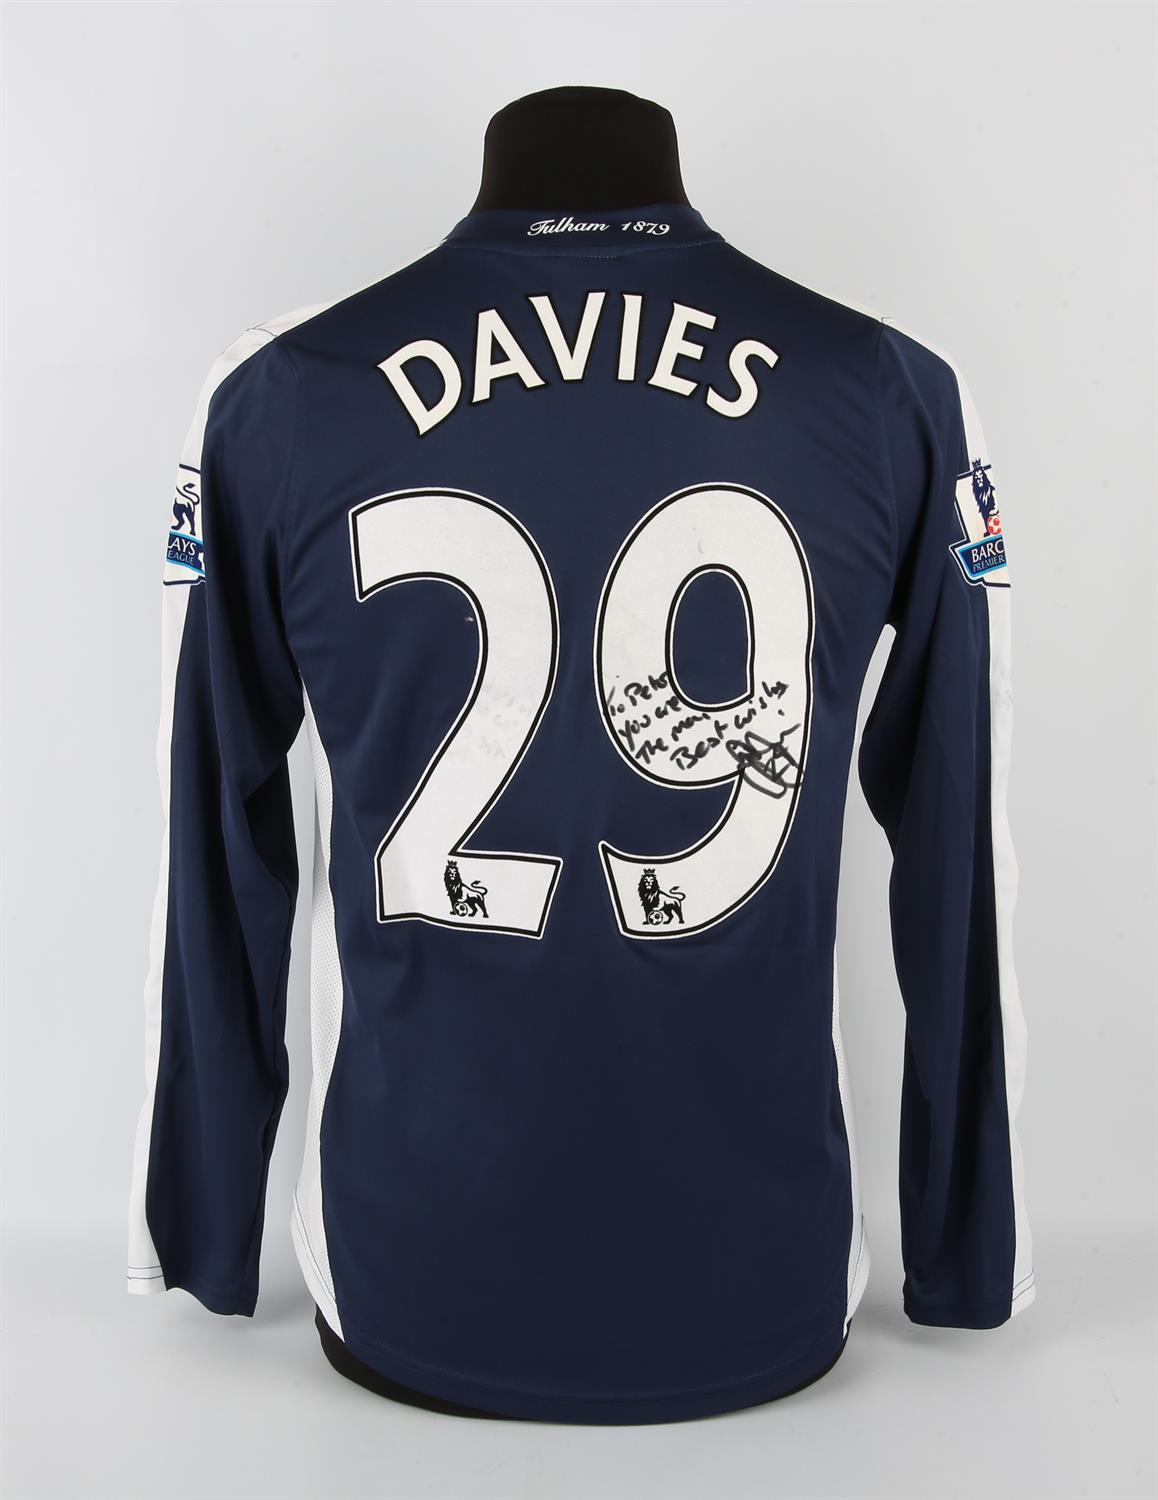 Fulham FC Football club, Simon Davies (No.29 - signed to friend- Peter) rare 3rd kit from 2009-2010,